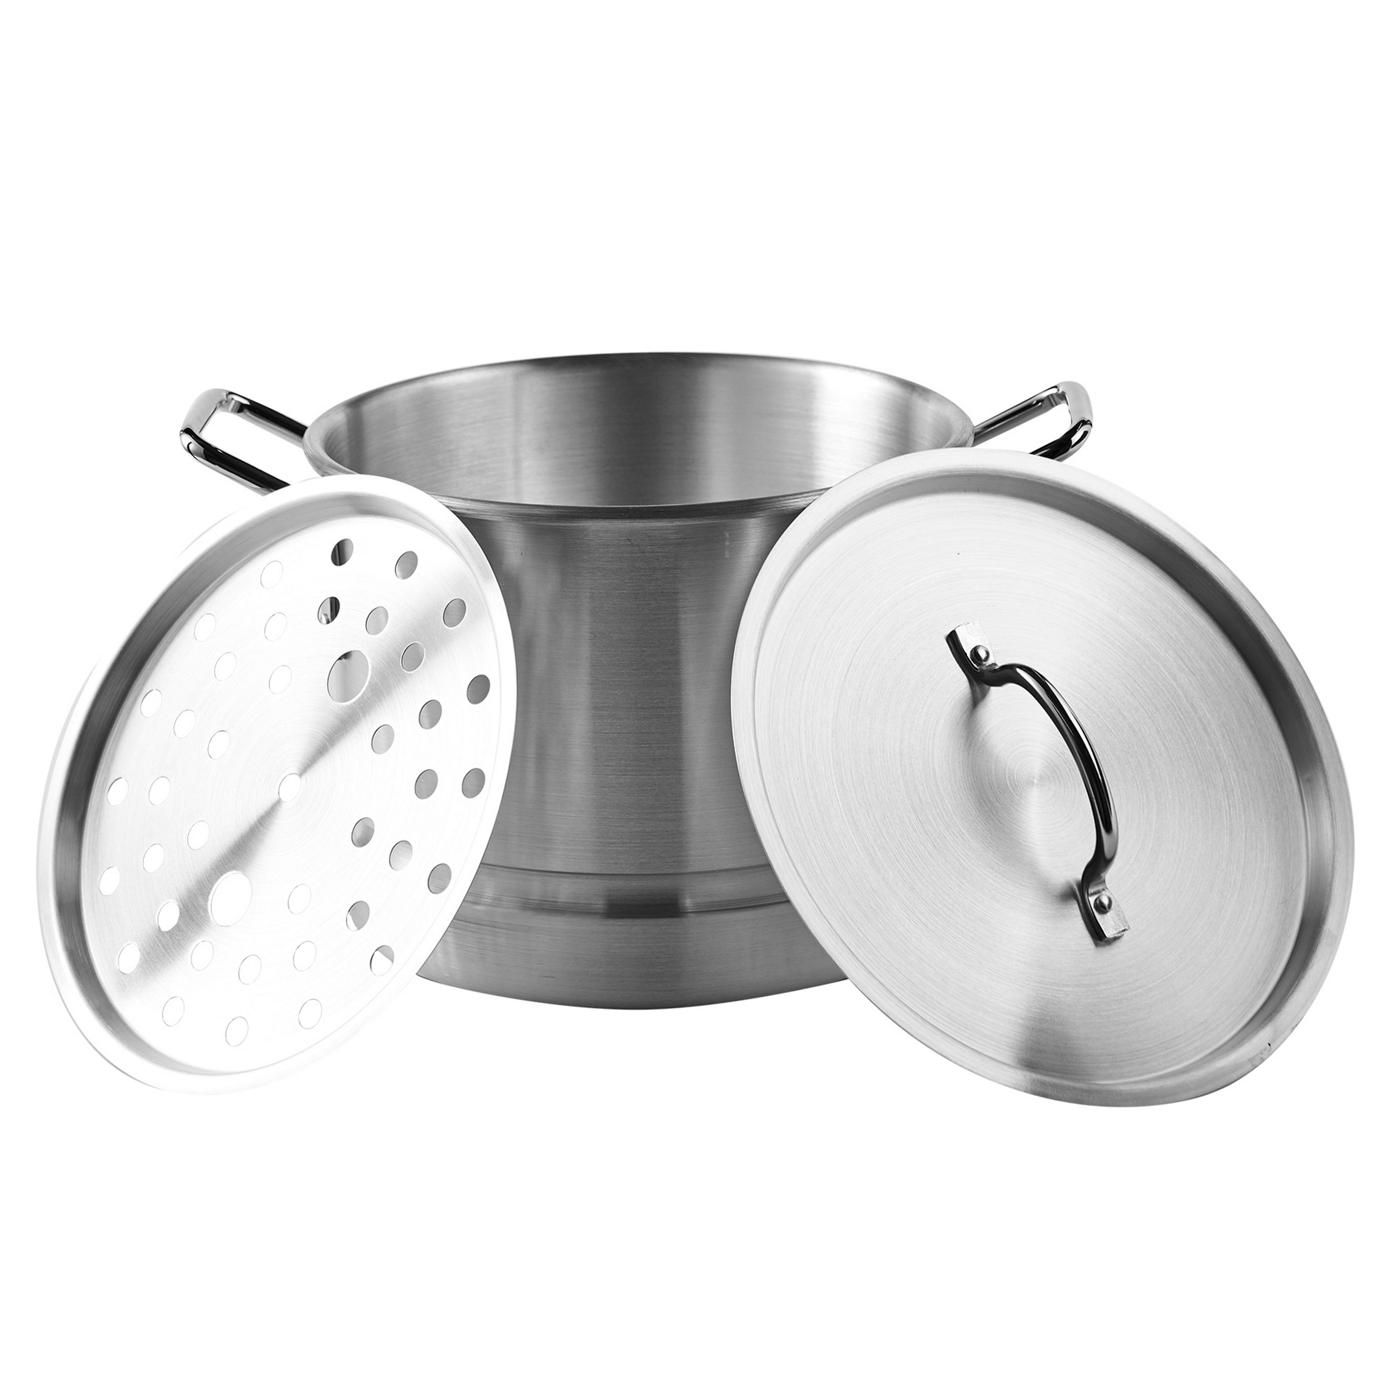 Imusa Stainless Steel Stock Pot with Lid - Shop Stock Pots & Sauce